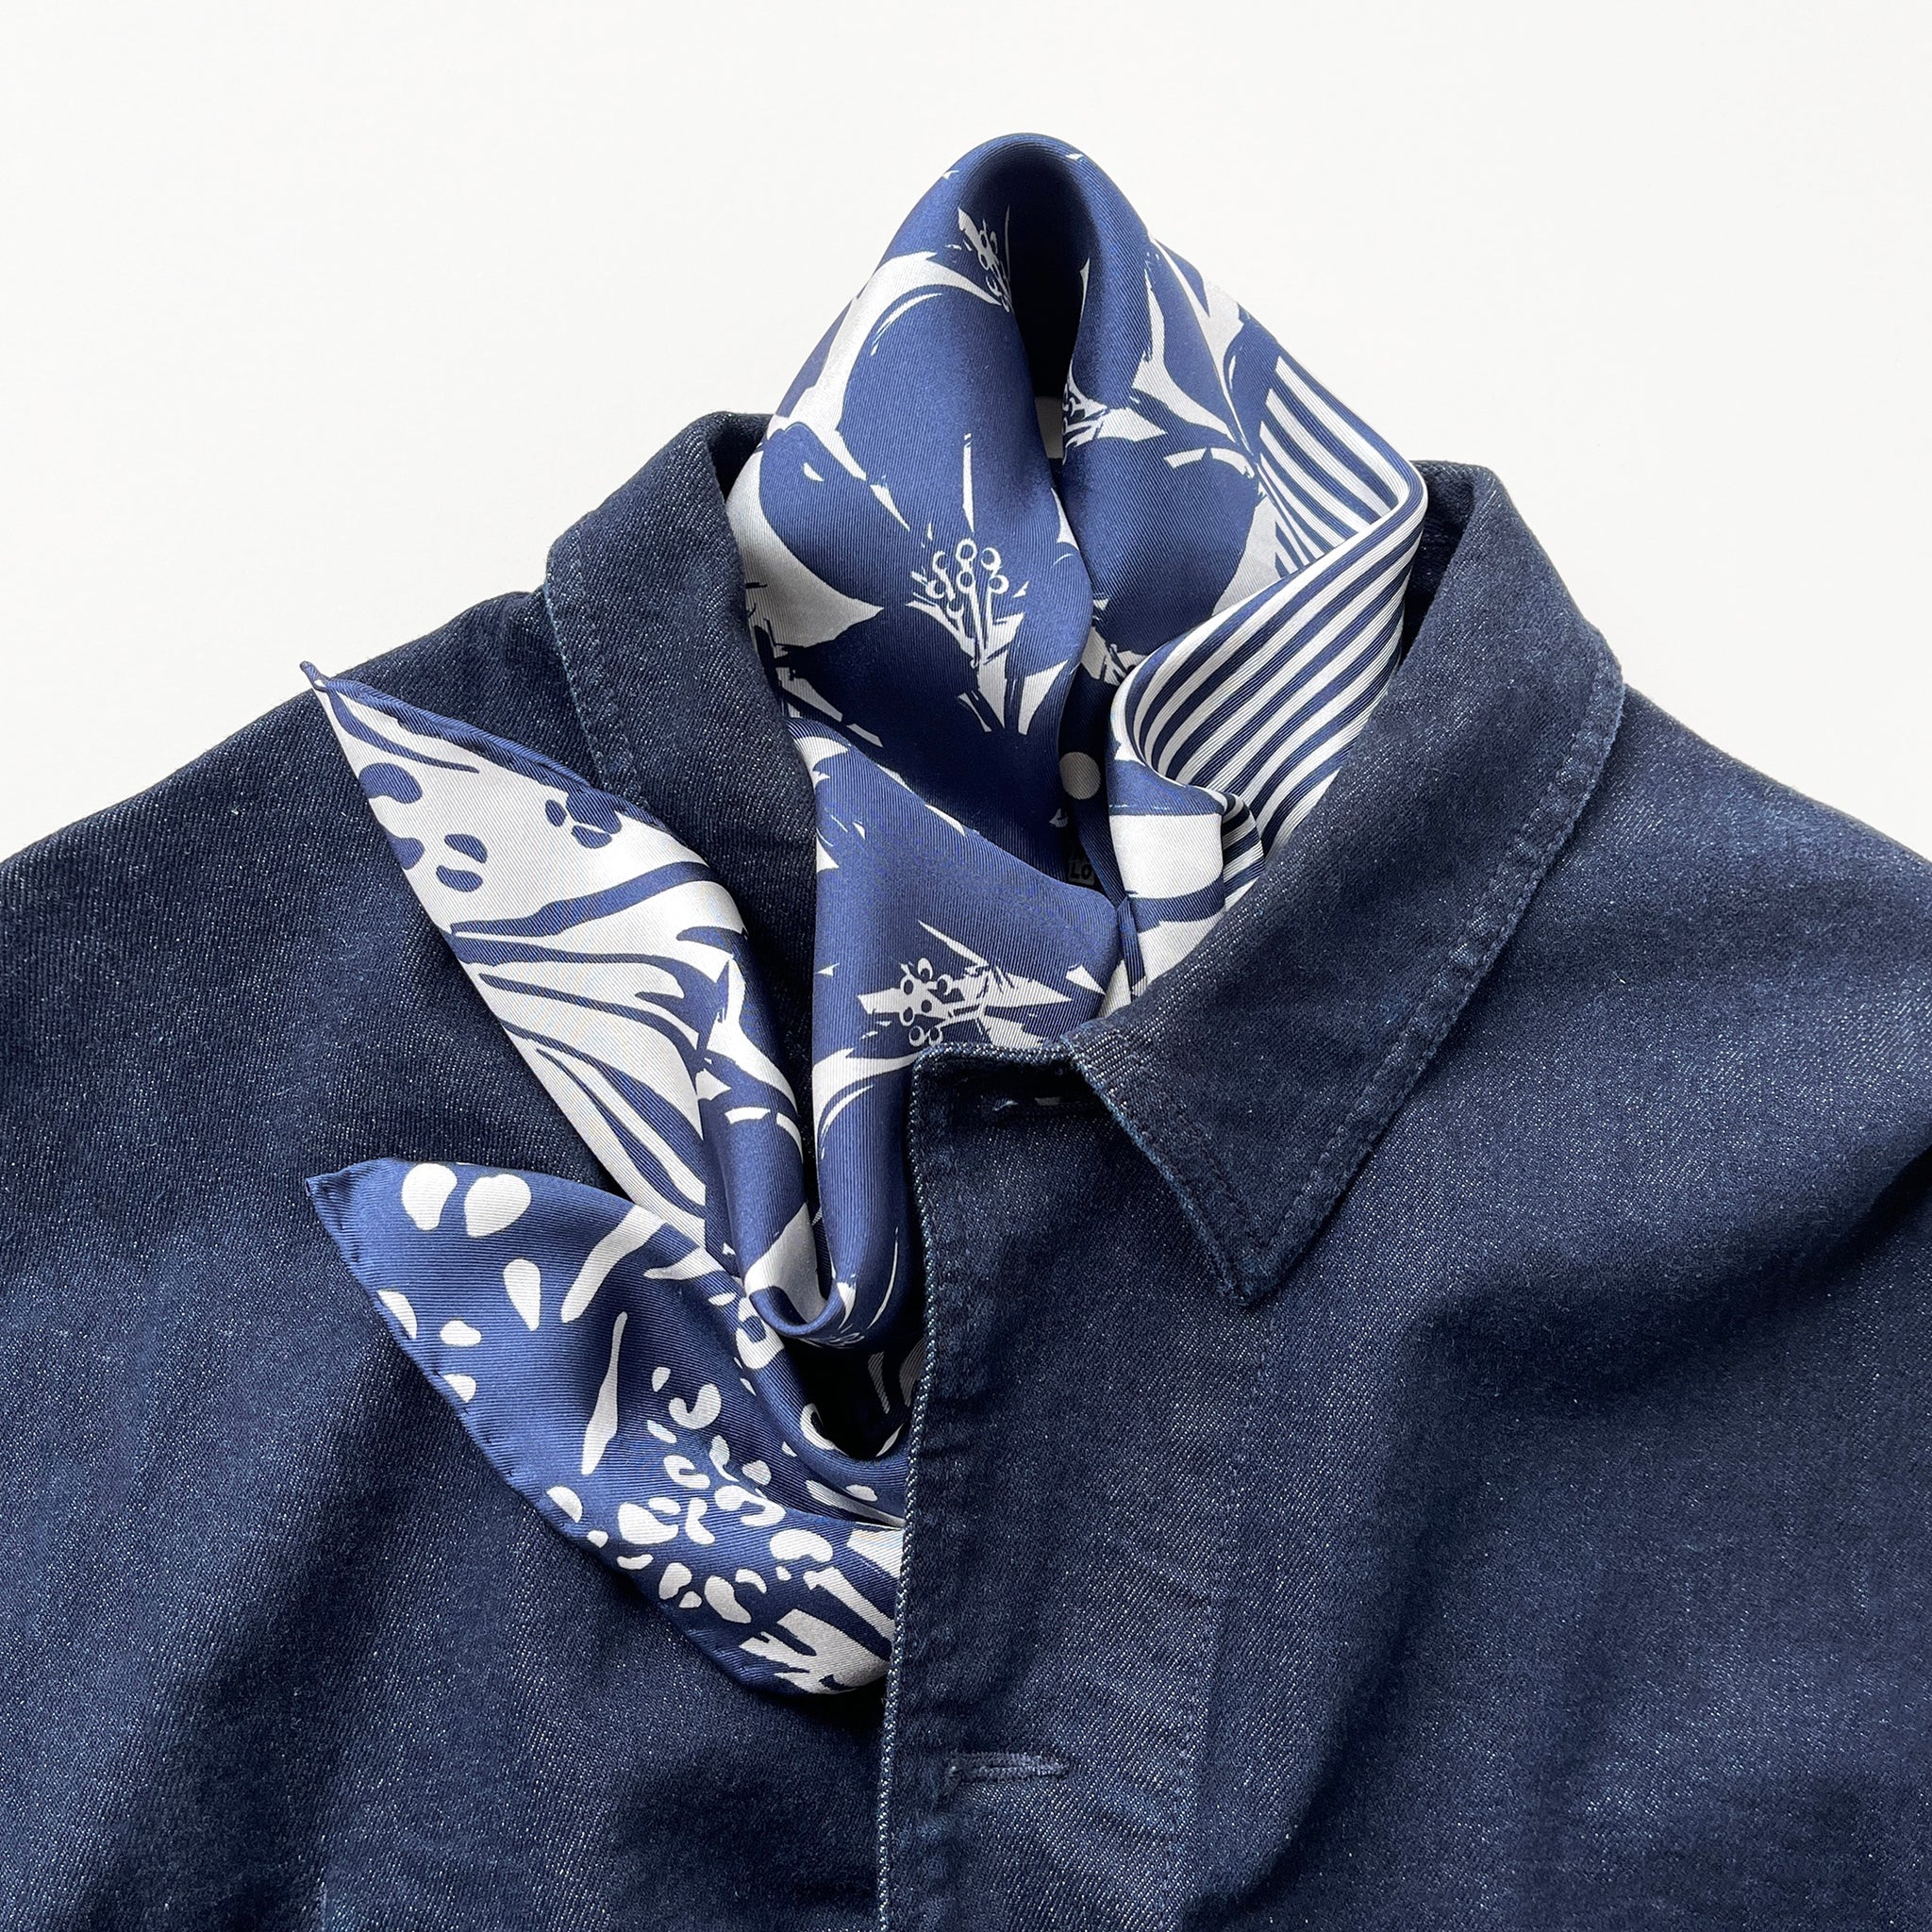 a navy blue and white square silk scarf featuring the combination of floral motifs, polka dots, and stripes prints with hand-rolled edges, paired with a denim jacket